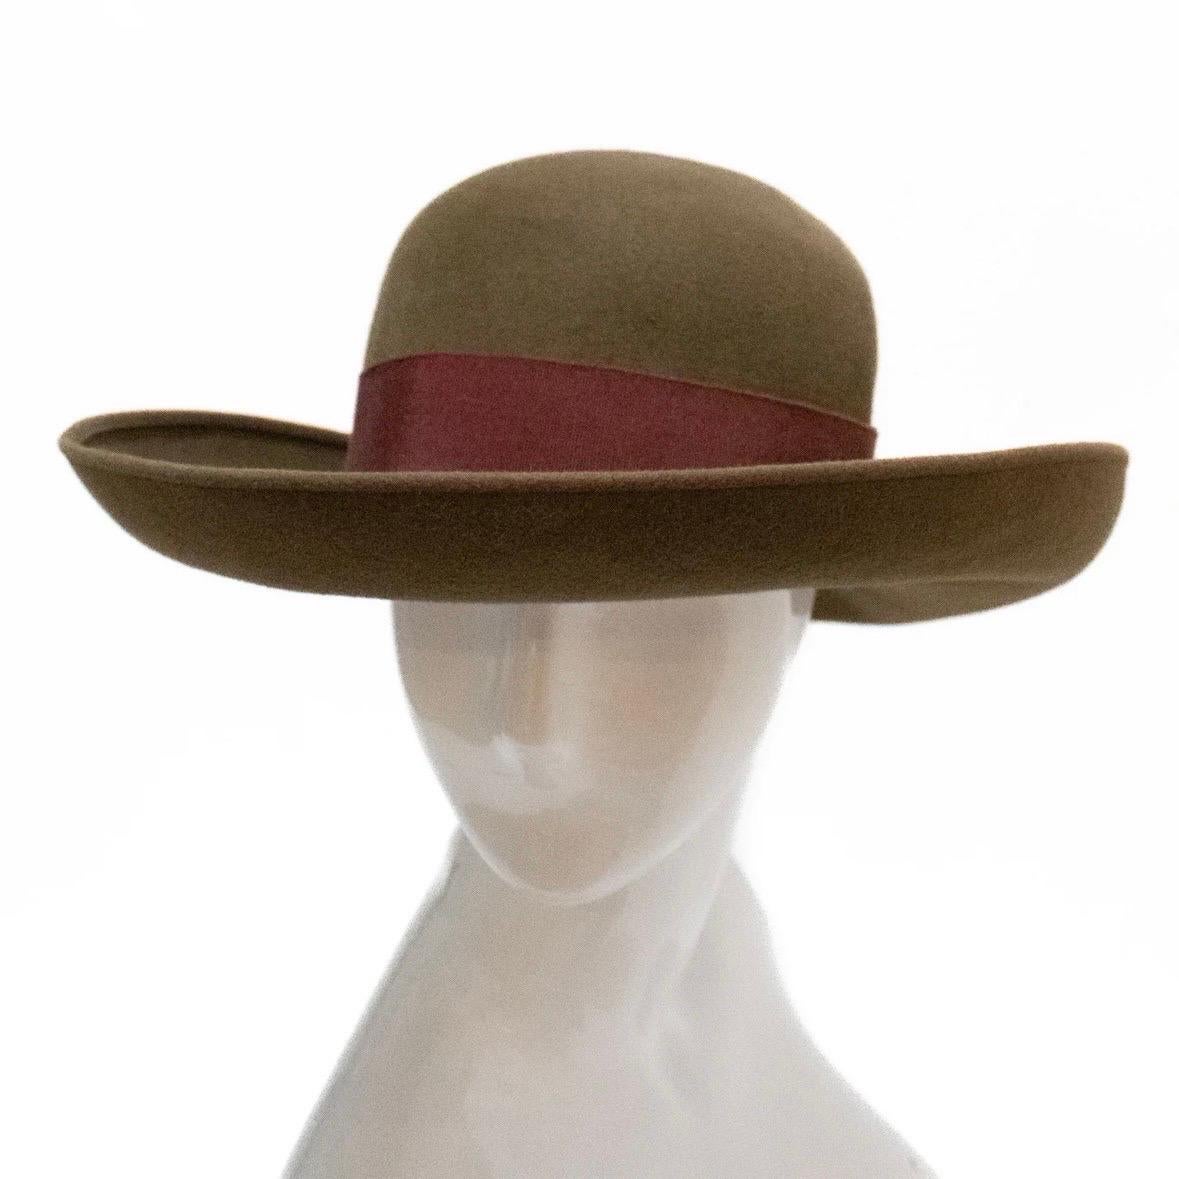 Broad-brimmed hat by Chanel
Made in France
Solid brown
Burgundy red grosgrain ribbon
Fur felt composition
Unworn with original style tag; near perfect with subtle signs of aging
Chanel Style/Model: 511005427084; color: 6040
Dry clean